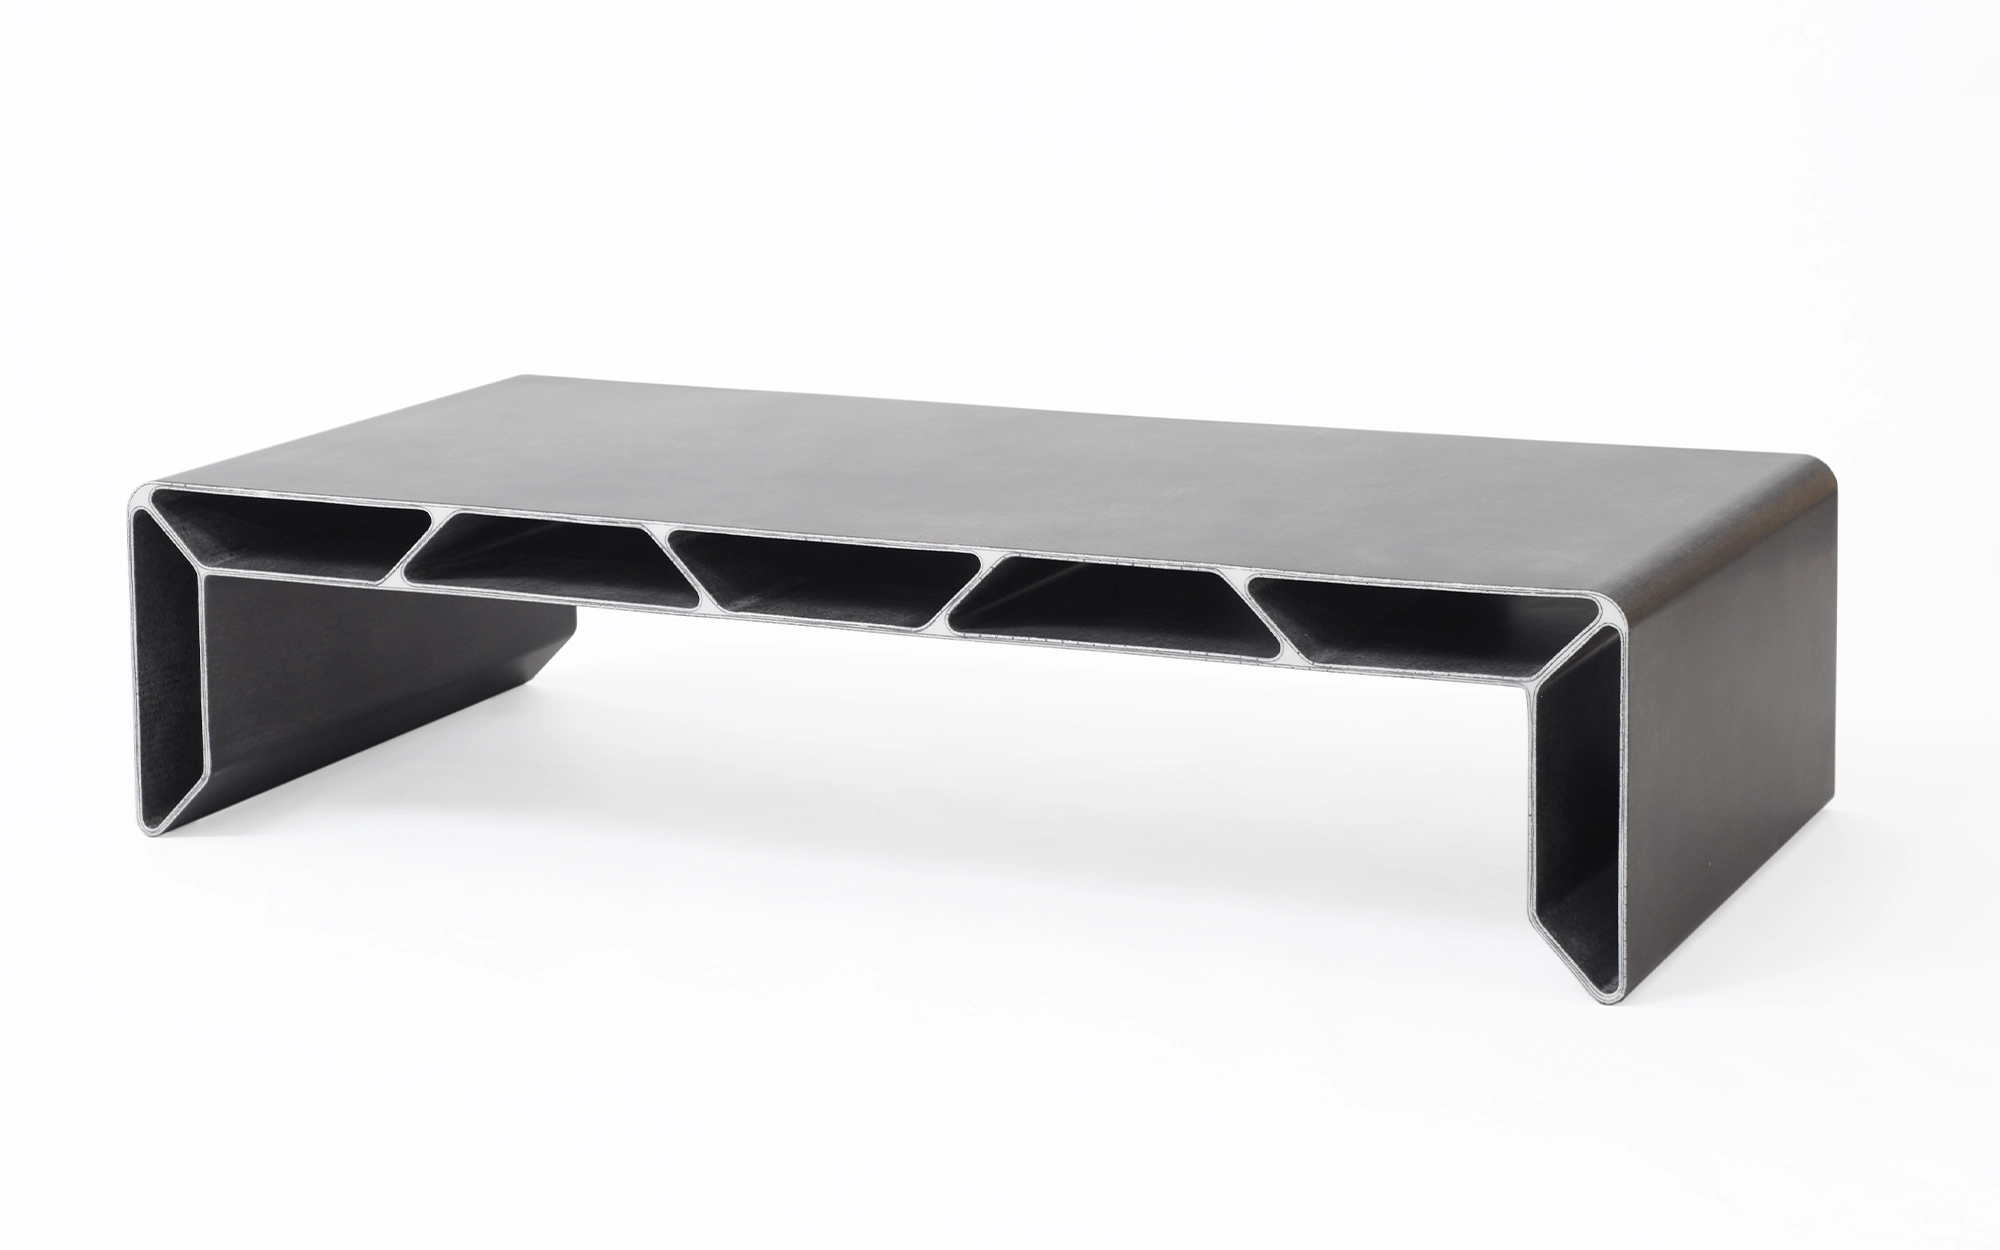 Cellae Coffee Table - François Bauchet - @home new chapter.